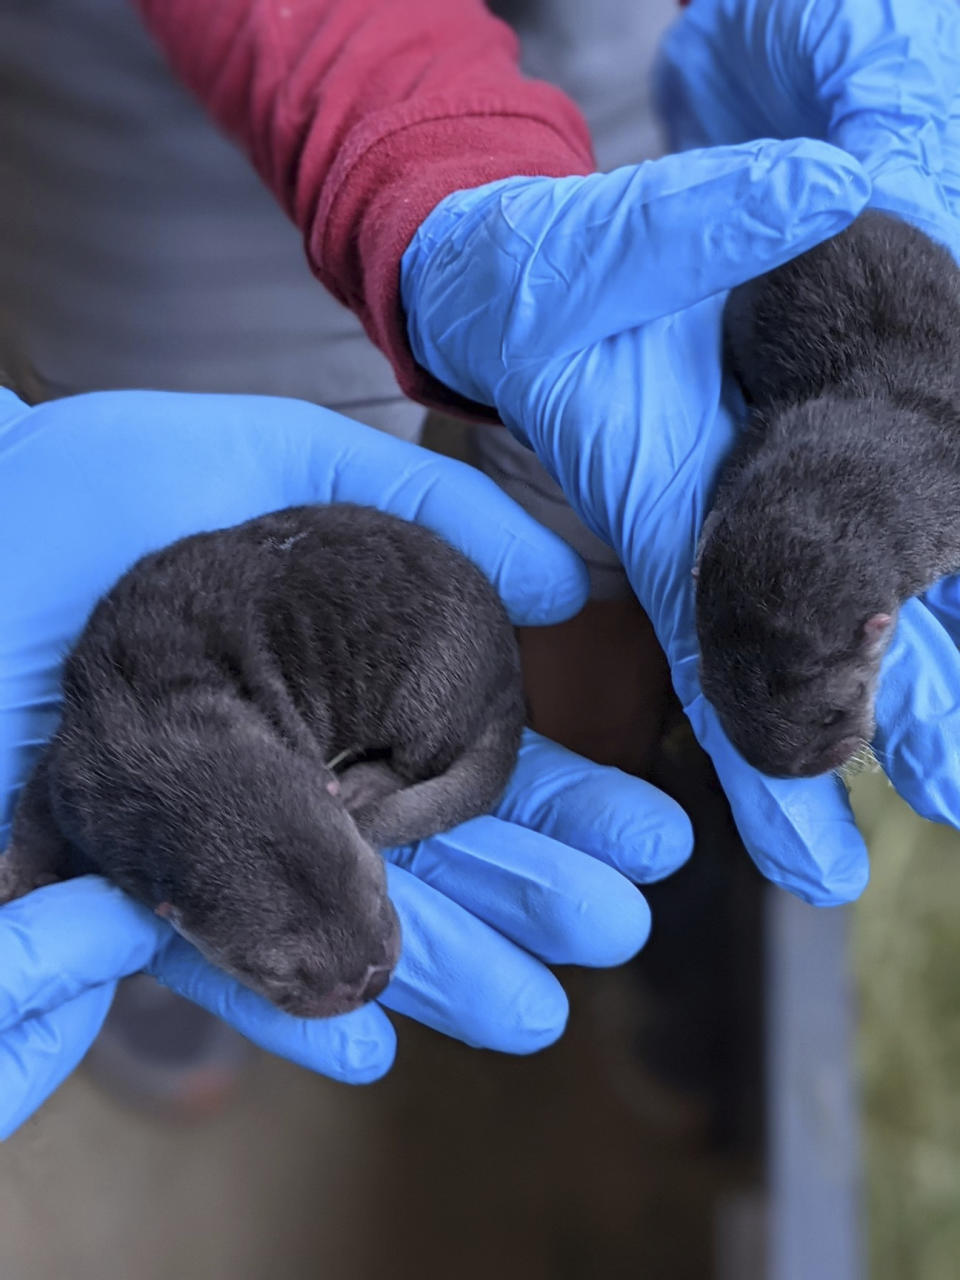 In this photo provided by Zoo Miami, North American river otter pups, born on Friday, Feb. 5, 2021, are held at the zoo in Miami. Zoo Miami is celebrating the birth of three North American river otter pups. (Sean Juman/Zoo Miami via AP)